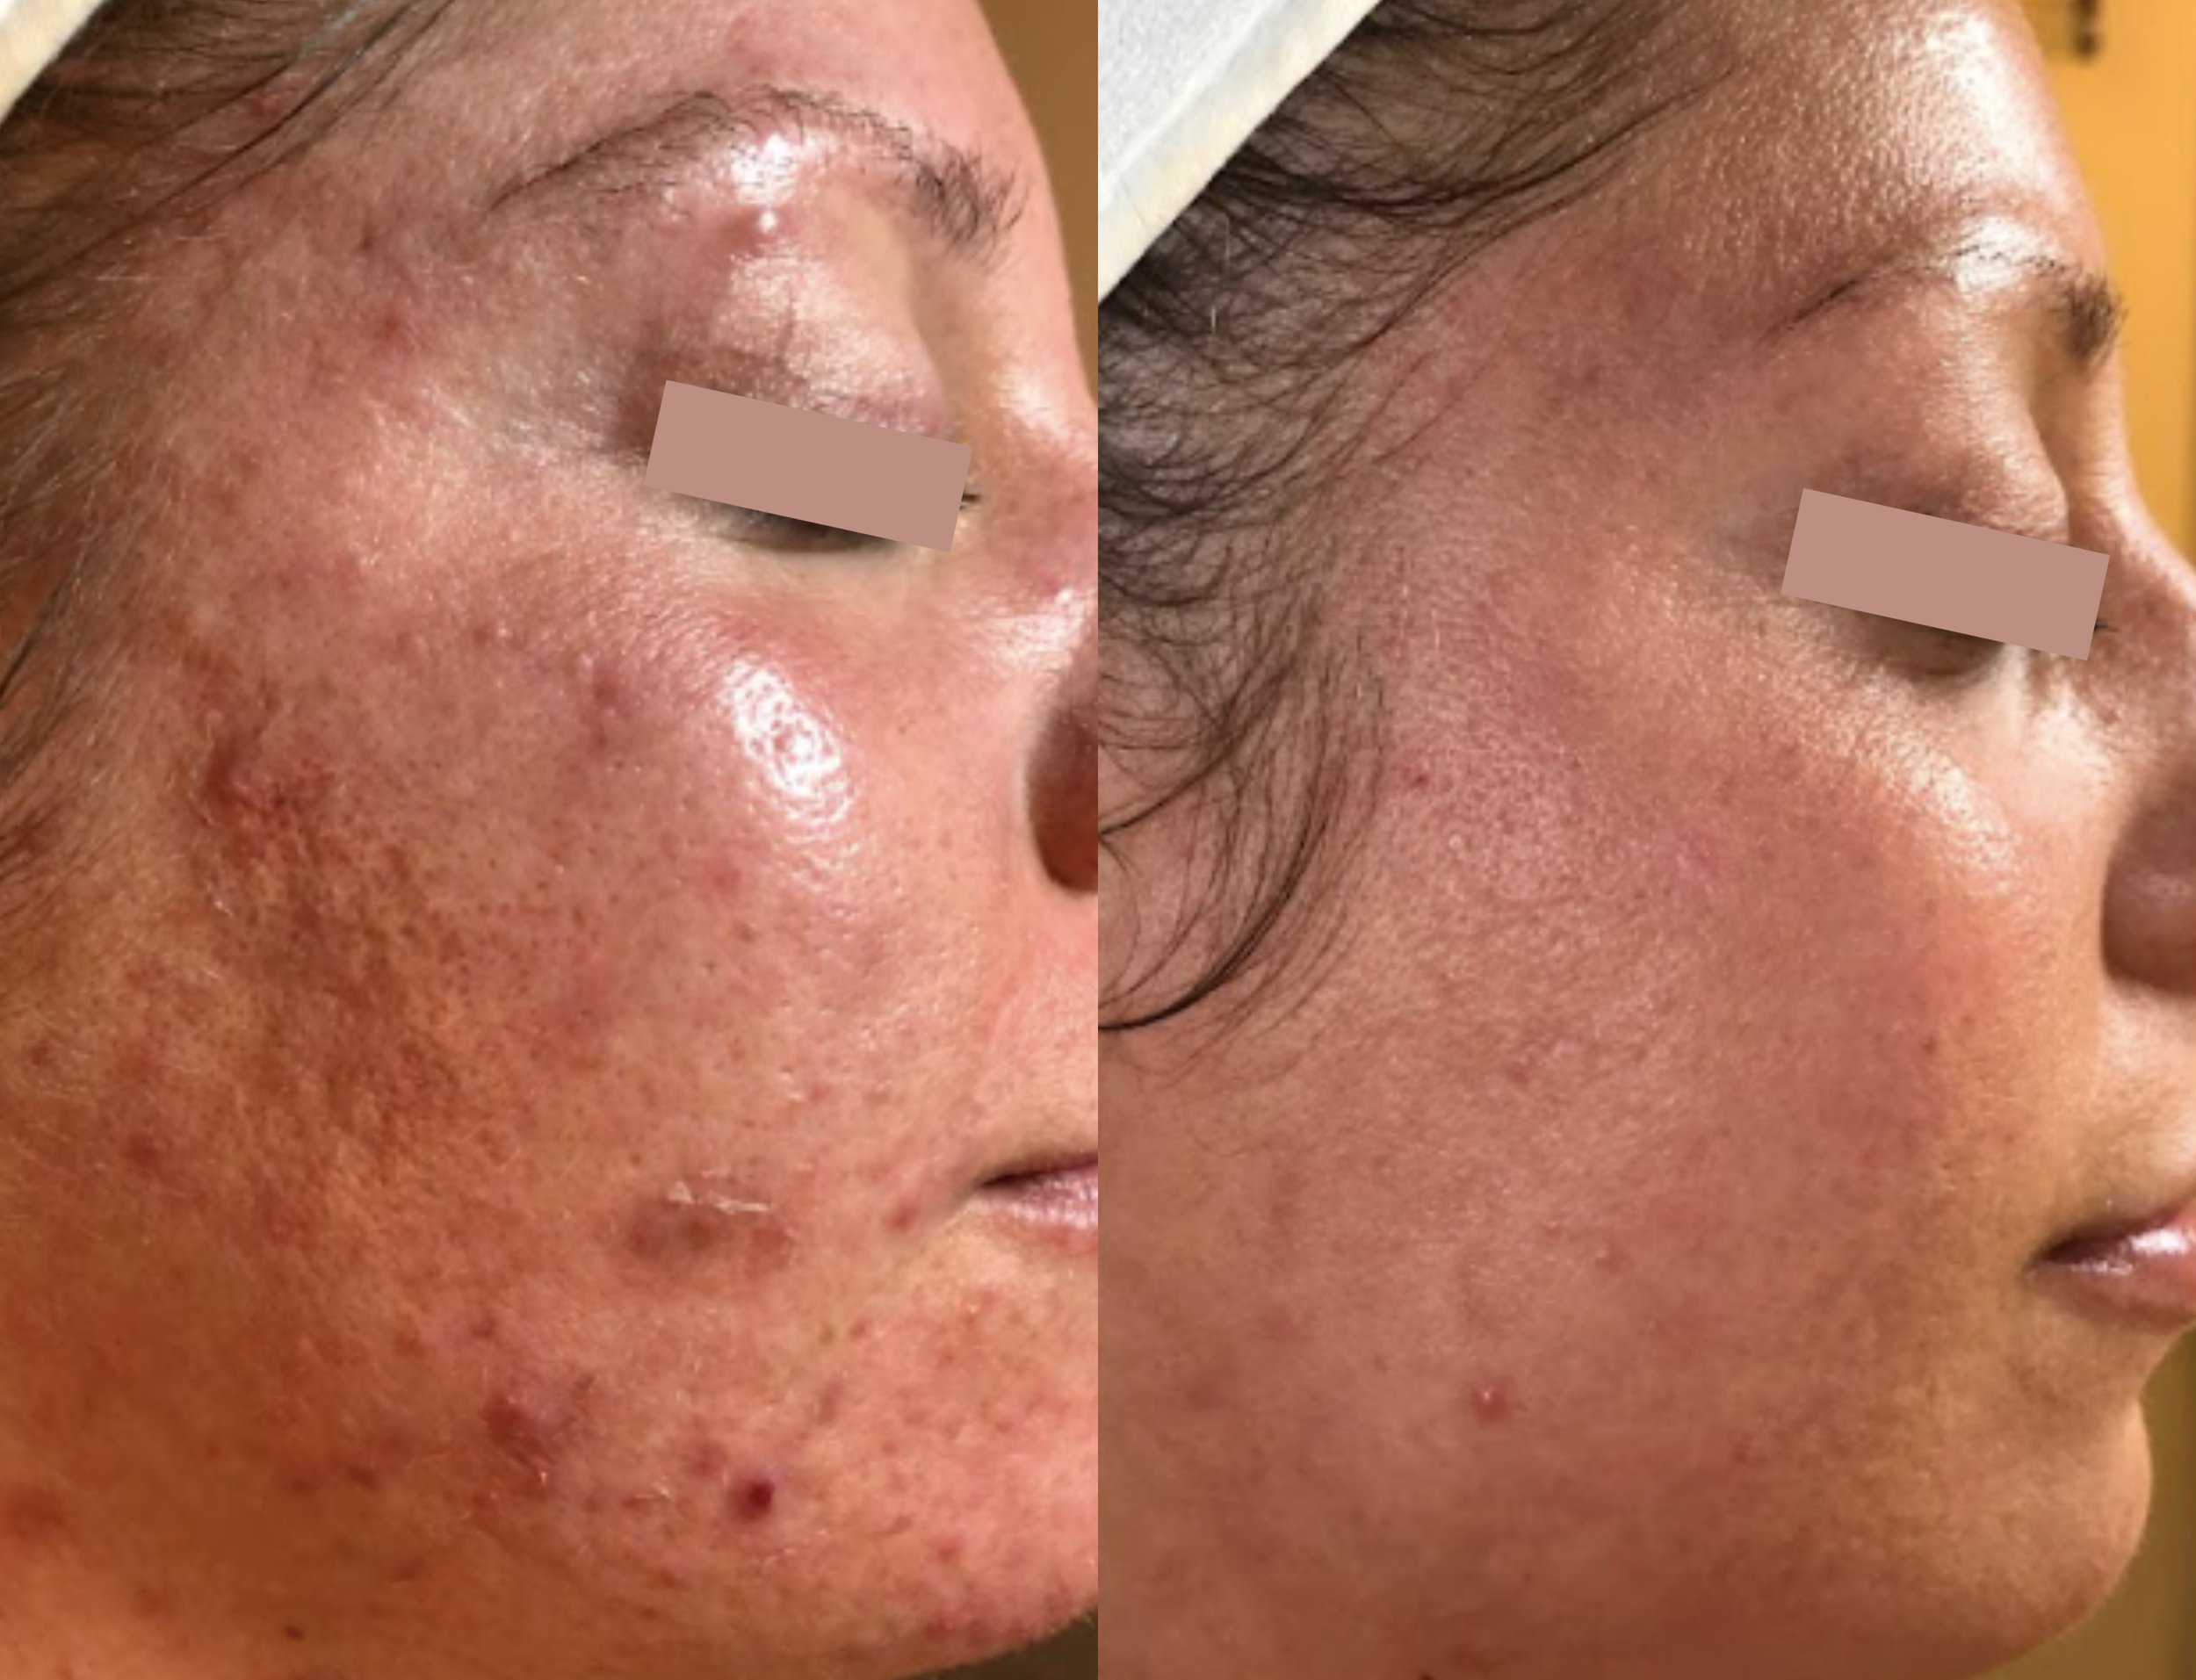  following 12 step + hi tech facials and stem-cell microneedling treatments  